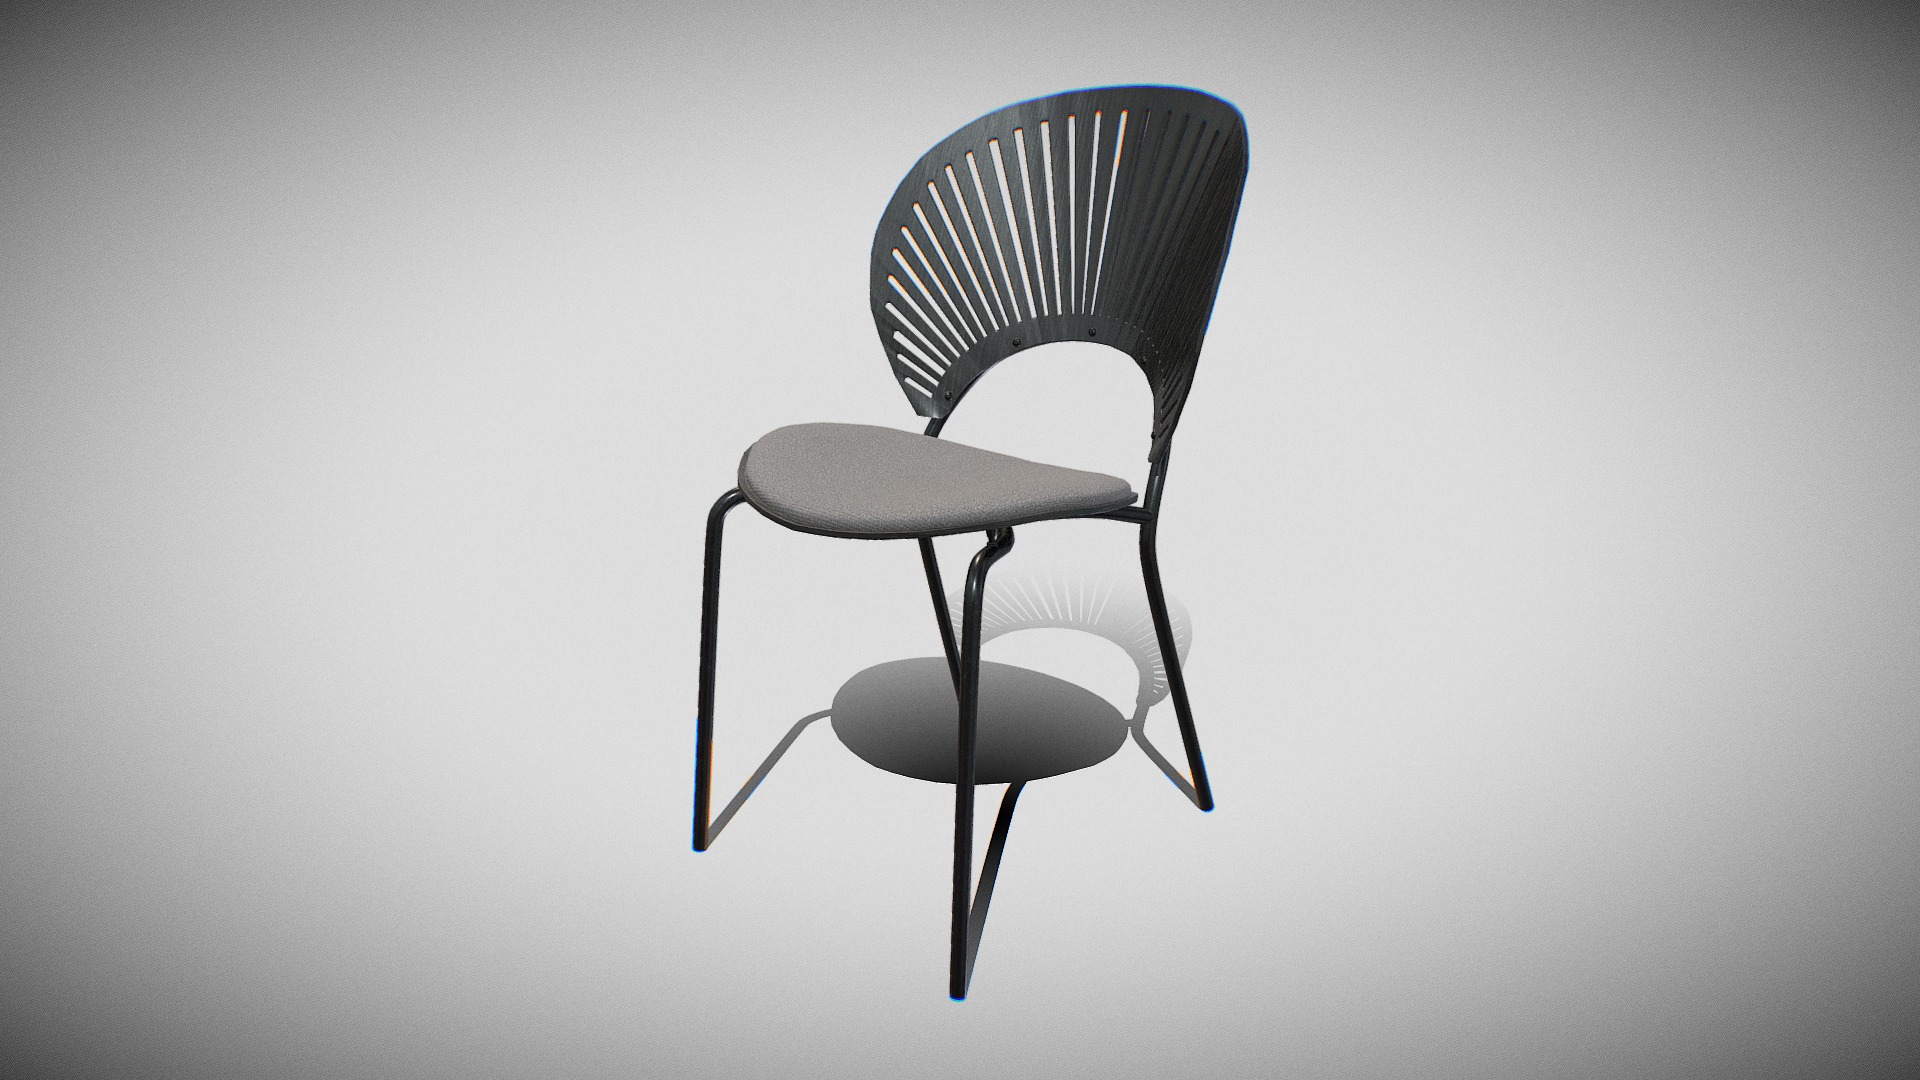 3D model TRINIDAD Chair-black ash wood - This is a 3D model of the TRINIDAD Chair-black ash wood. The 3D model is about a chair with a cushion.